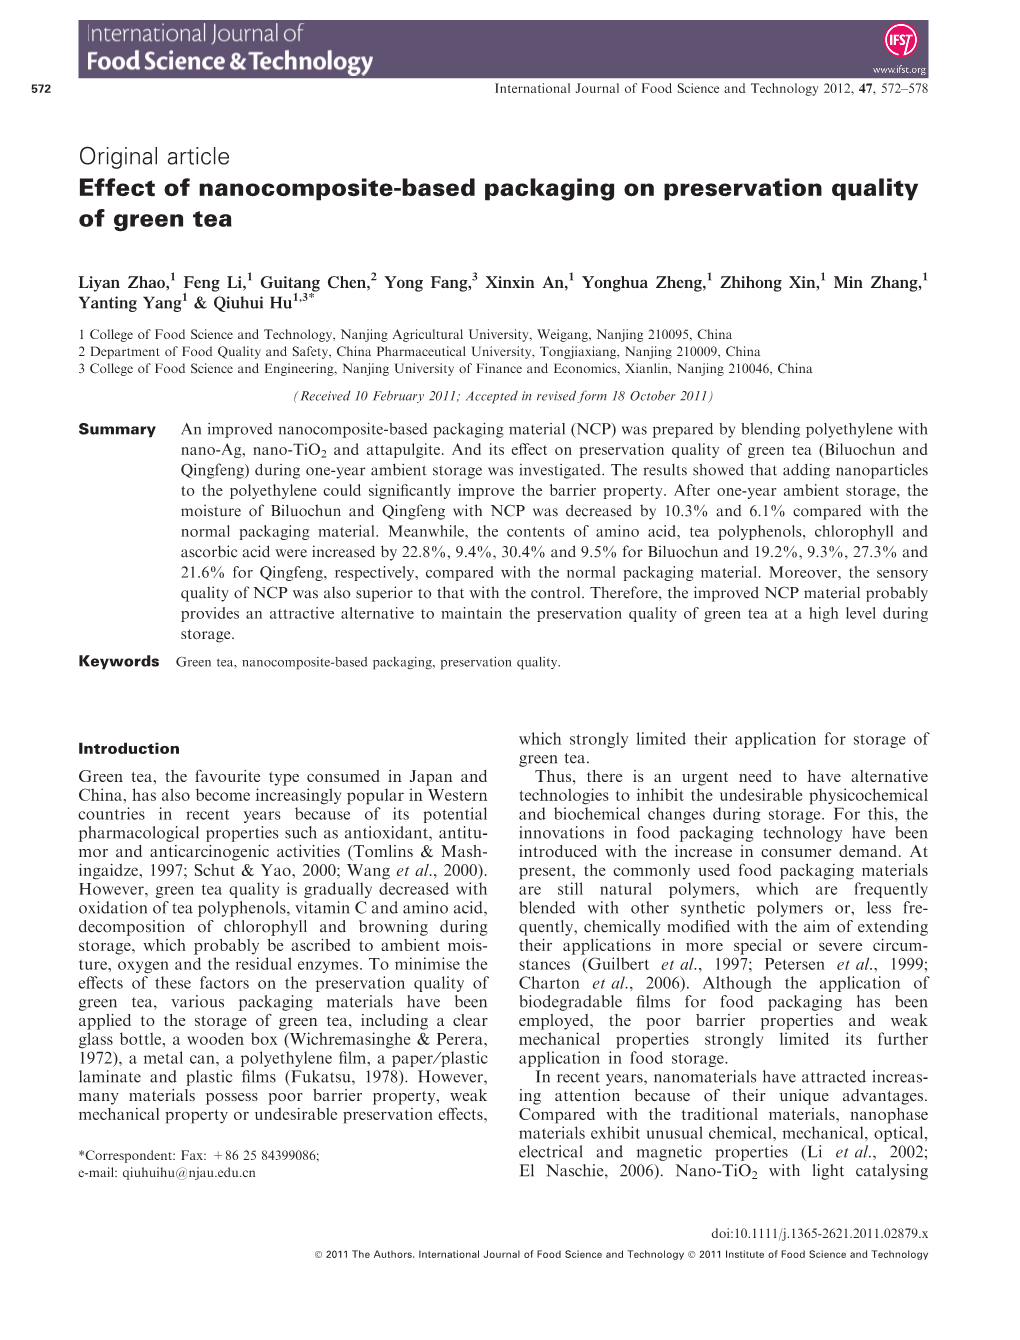 Effect of Nanocompositebased Packaging on Preservation Quality of Green